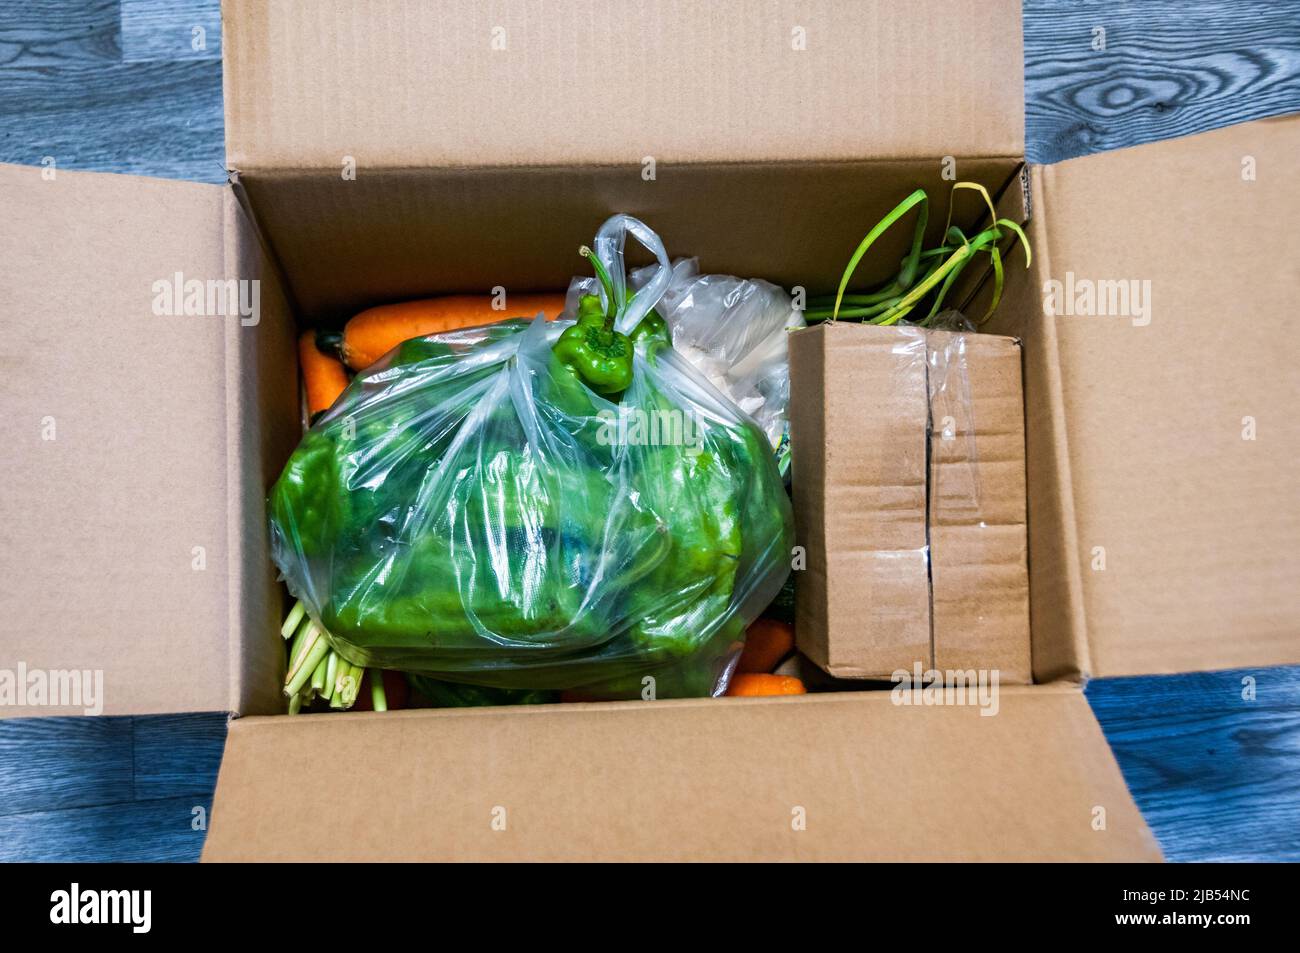 Food package number 6 received by residents in a housing compound in Puxi on day 40 of the Puxi-wide lockdown for the 2022 Covid-19 outbreak in Shangh Stock Photo